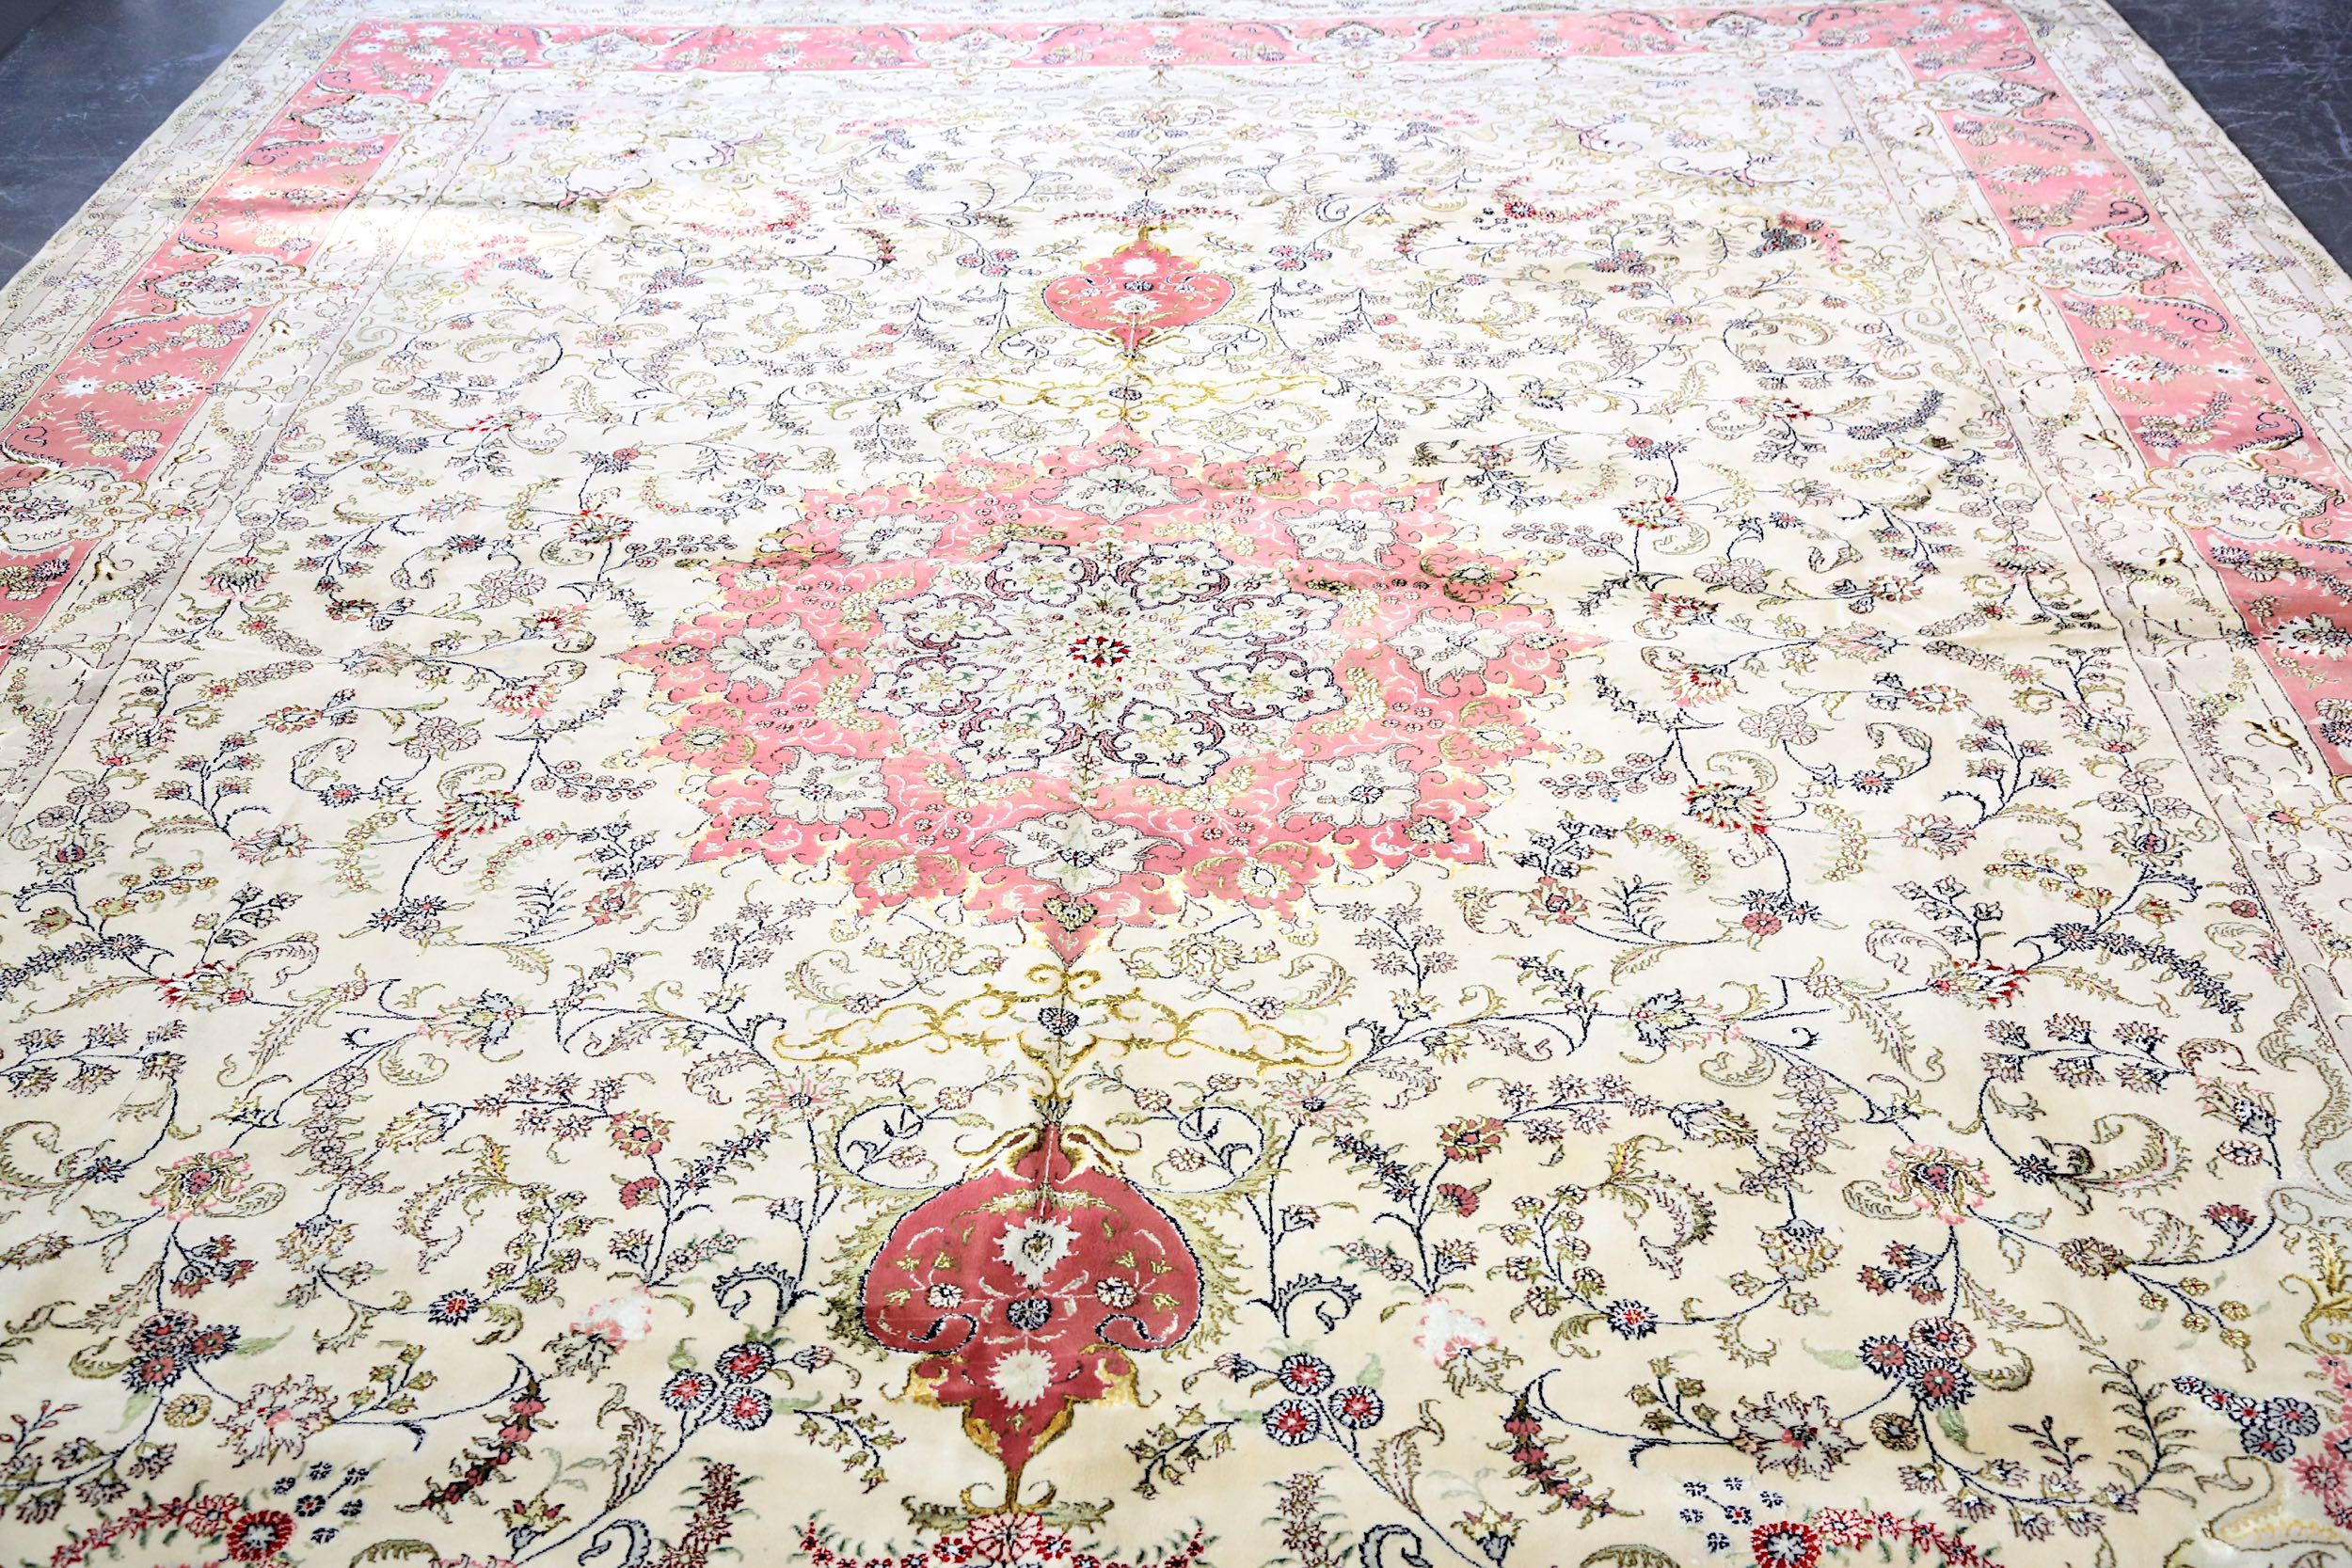 A FINE PART SILK TABRIZ CARPET, NORTH-WEST PERSIA approx: 14ft.6in. x 10ft.2in.(442cm. x 309cm.) - Image 2 of 7